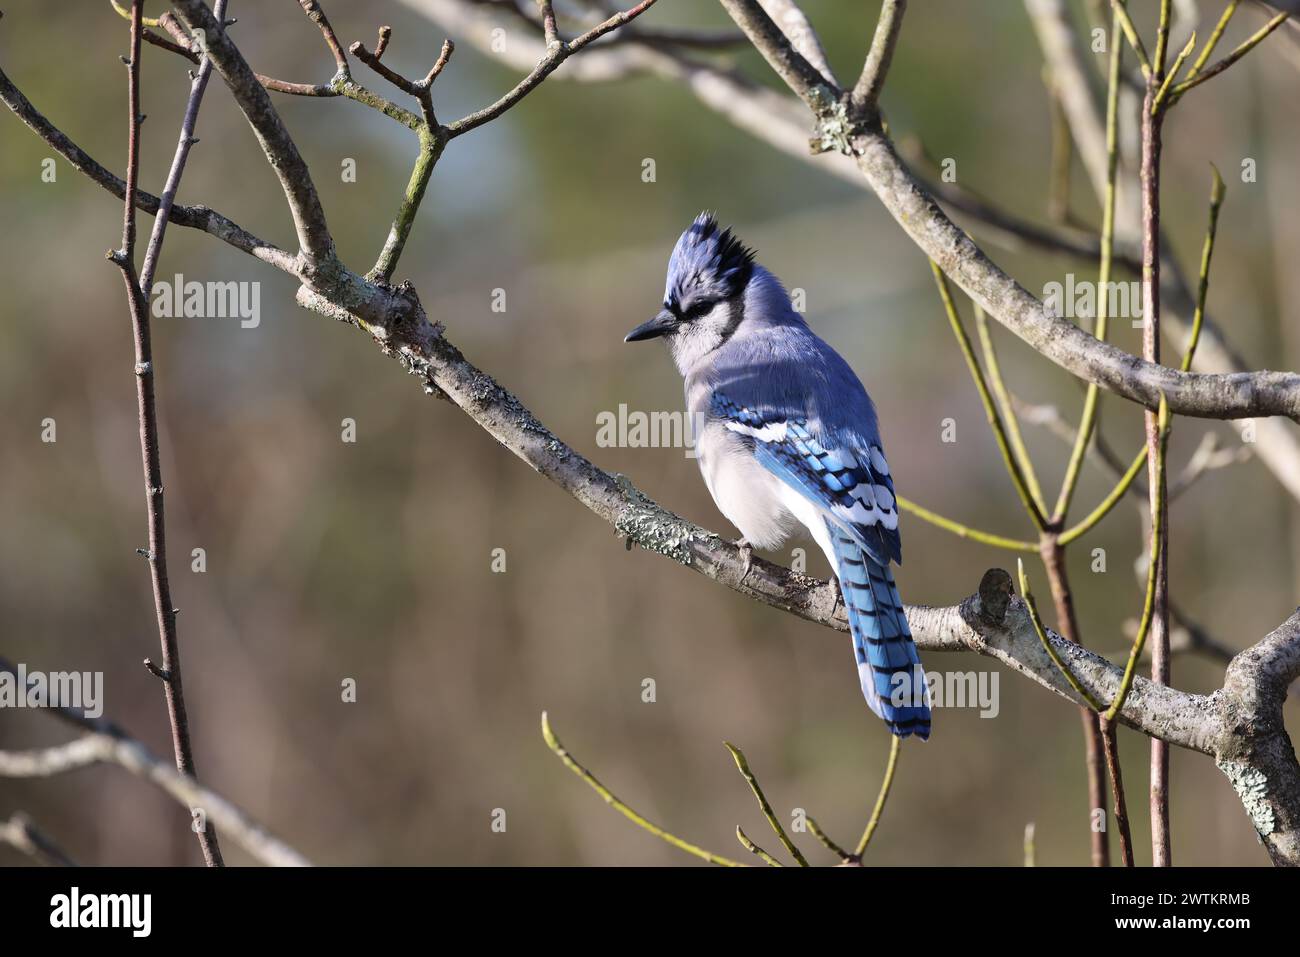 A blue jay bird resting on tree branches Stock Photo